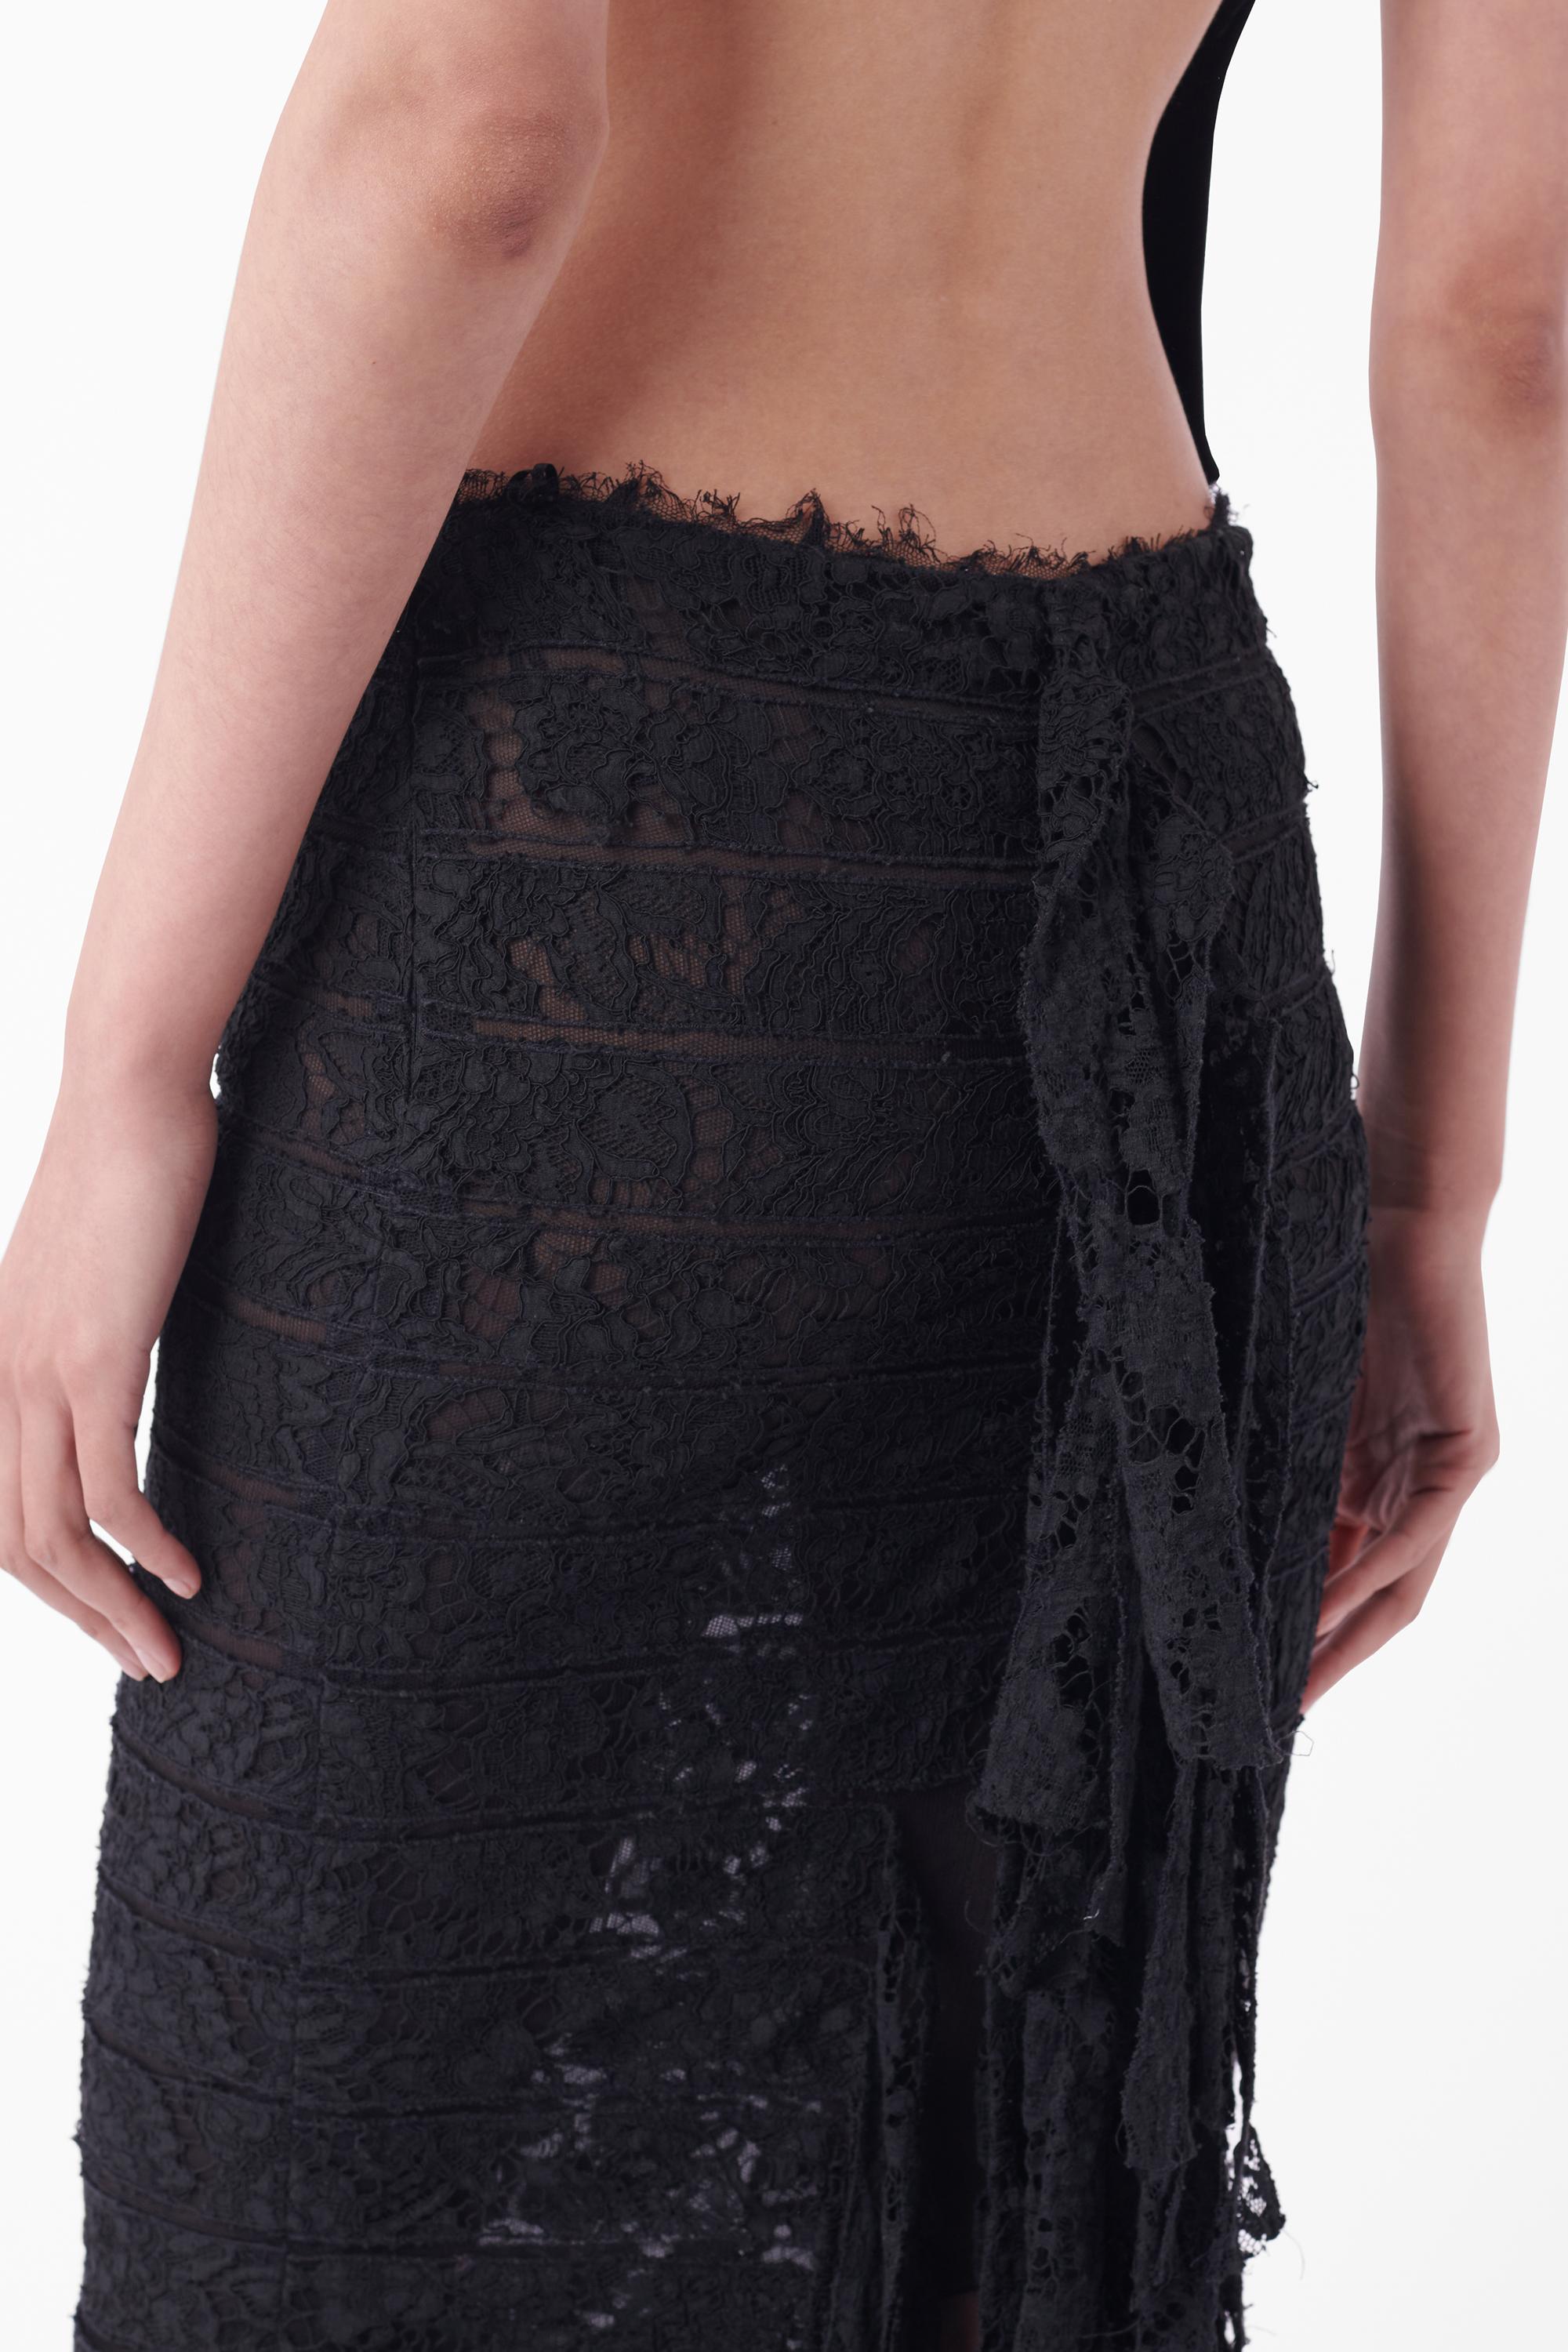 We are excited to present this Tom Ford for Yves Saint Laurent Fall Winter 2002 lace skirt. Similar to that seen on the season's runway. Features horizontal sheer lace panelling, raw hemline finishes, lace ruffle back, mesh lining and invisible zip